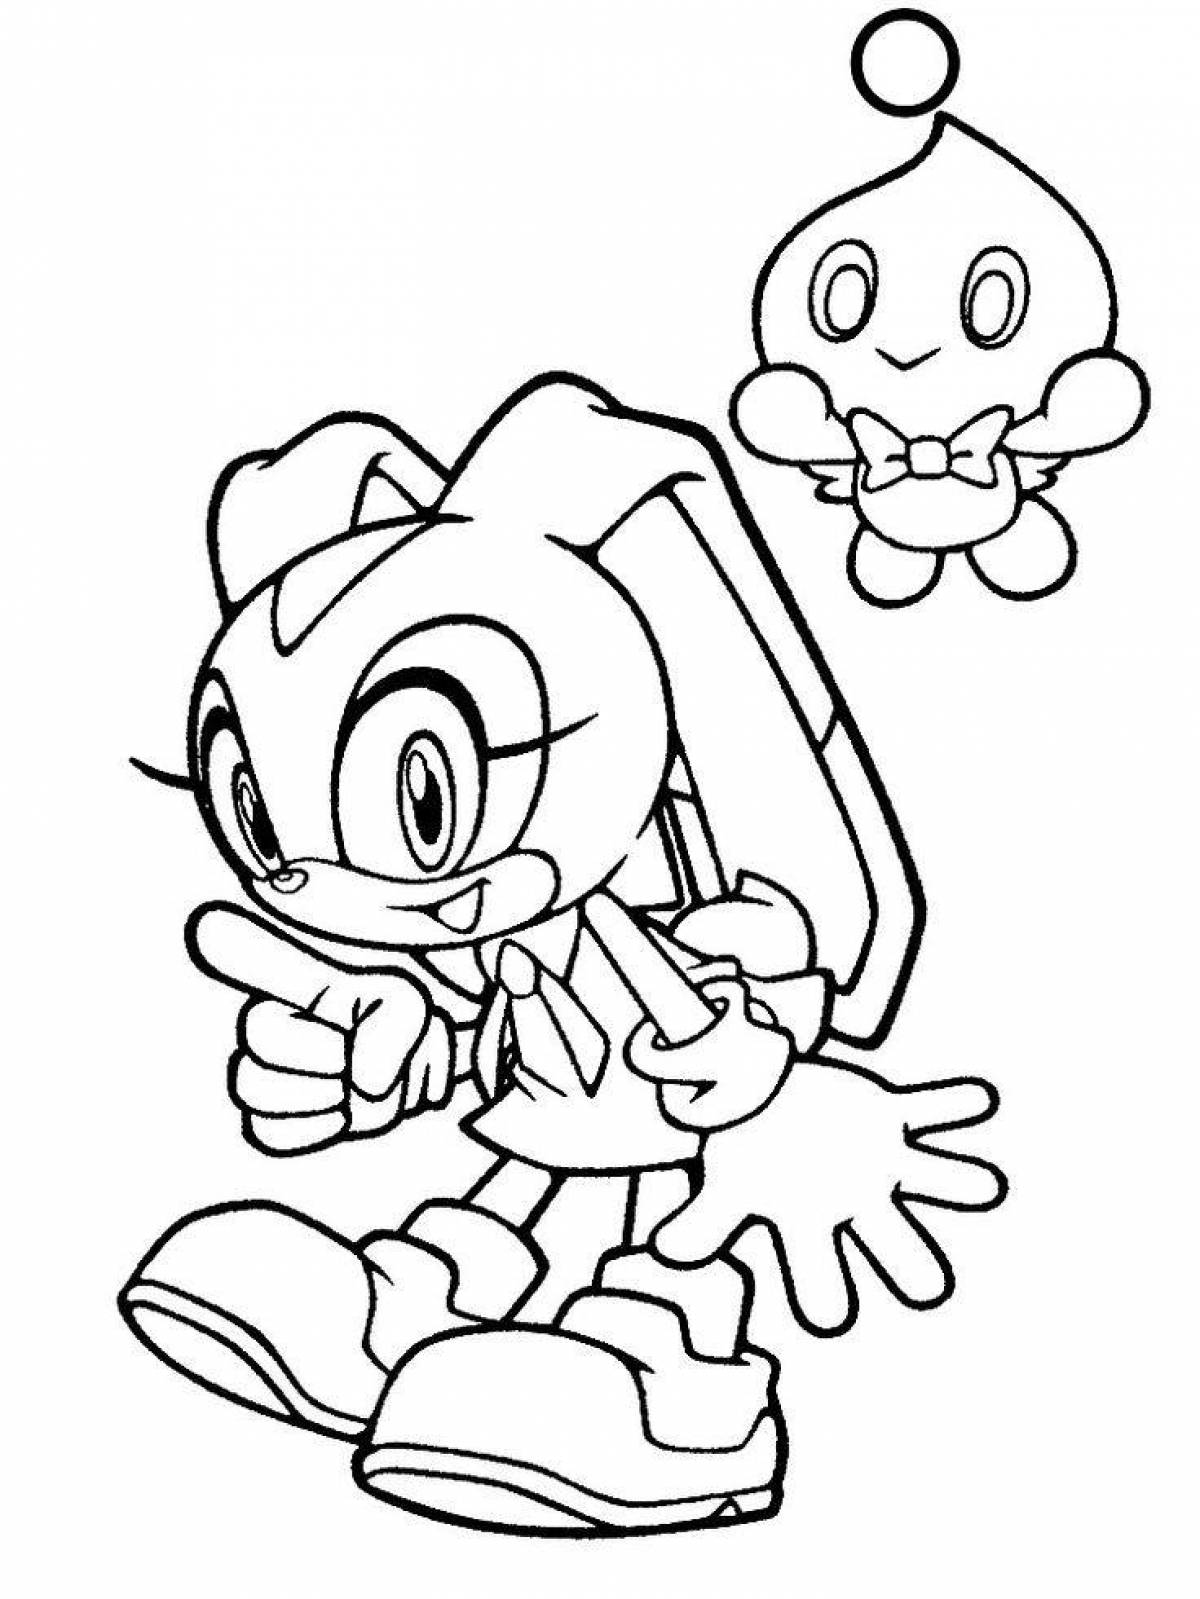 Great sonic coloring book for kids